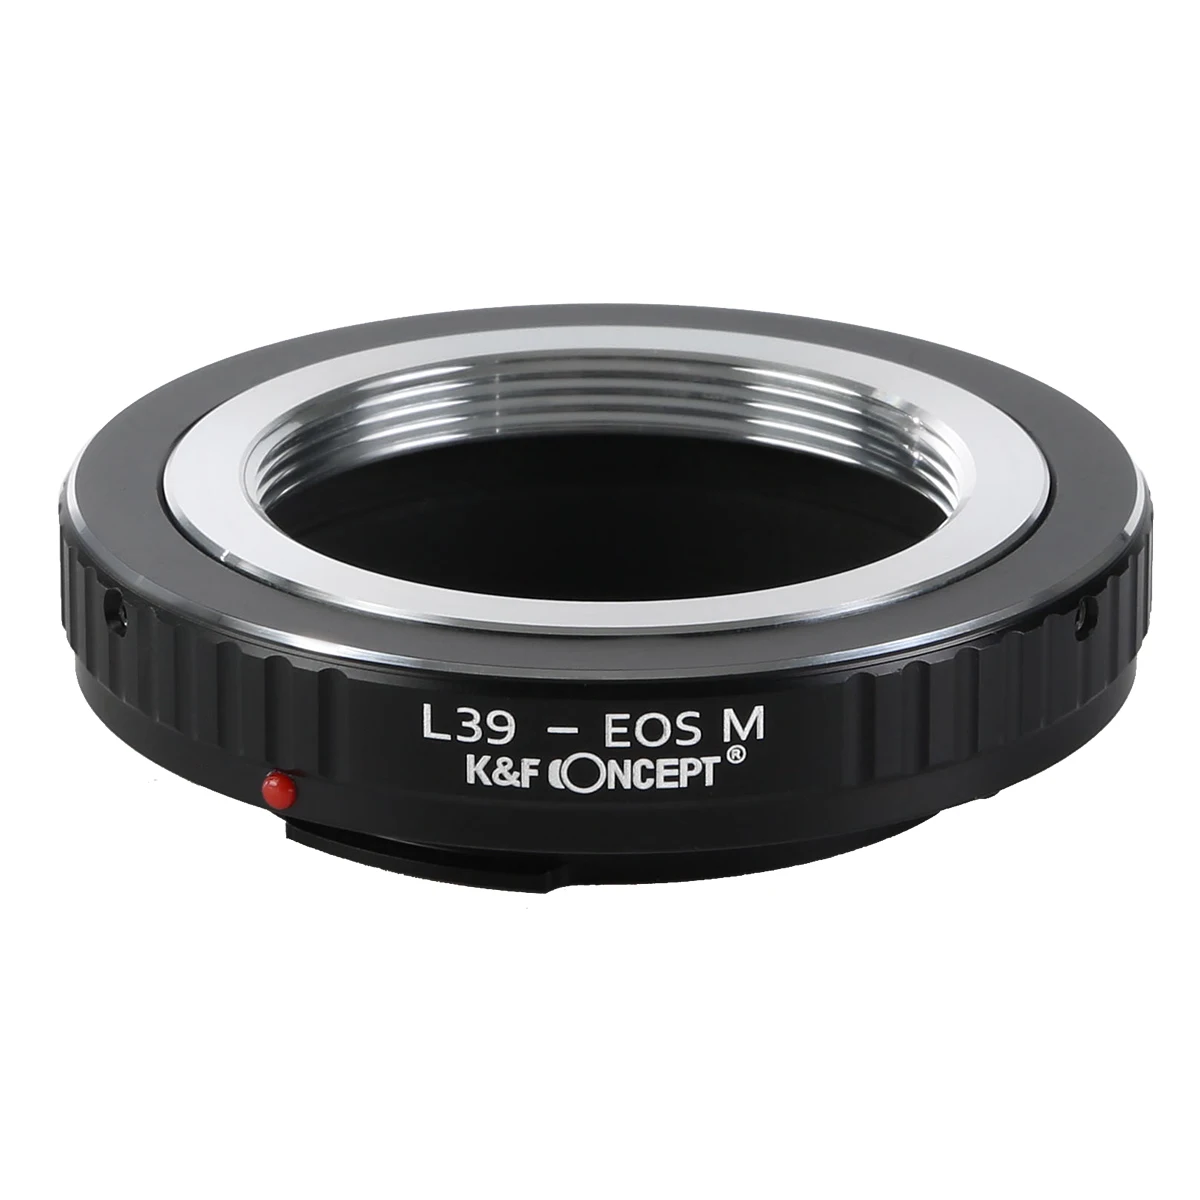 

K&F Concept Lens Adapter for M39 mount lens to Canon EOS M camera M1 M2 M3 M5 M6 M50 M100